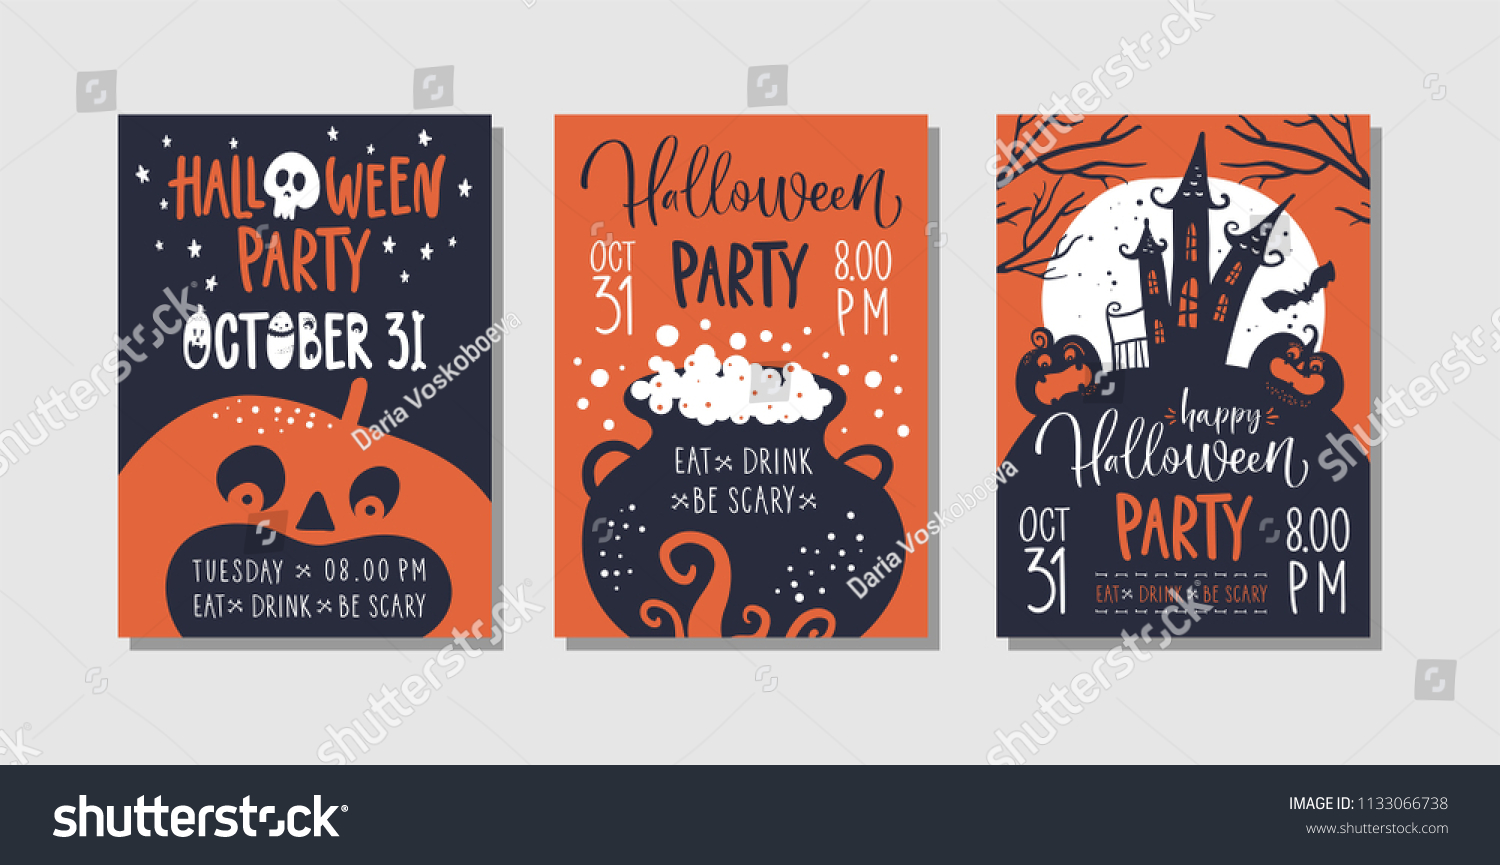 Vector set of Halloween party invitations or greeting cards with handwritten calligraphy and traditional symbols. #1133066738